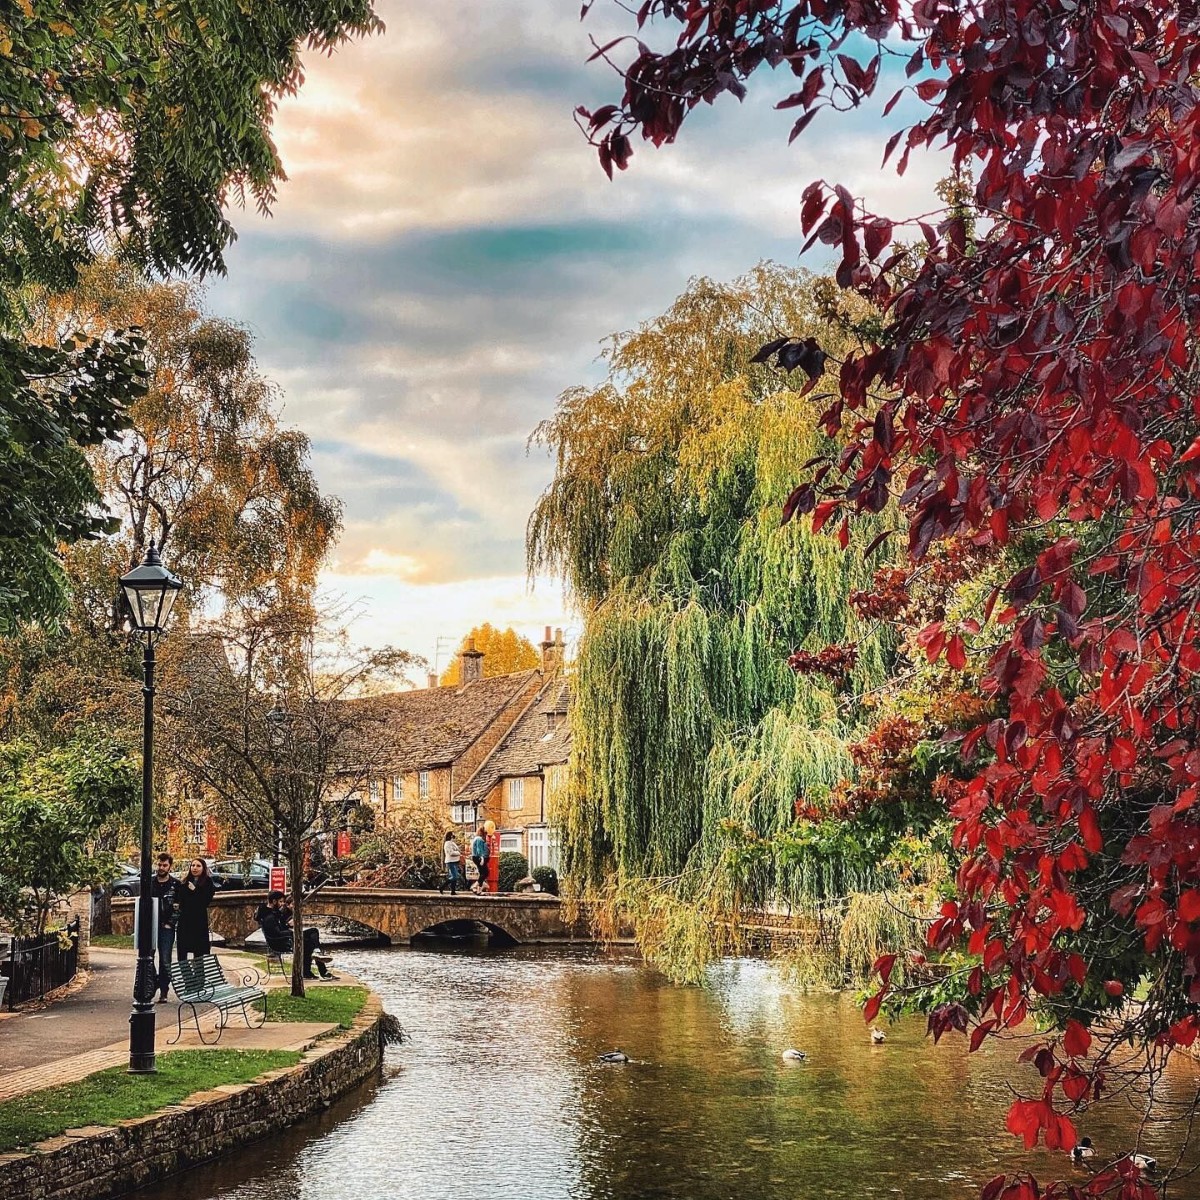 A postcard-worthy scene from the Bourton-on-the-Water in the Cotswolds. 🍂 📸: @alex_tz78